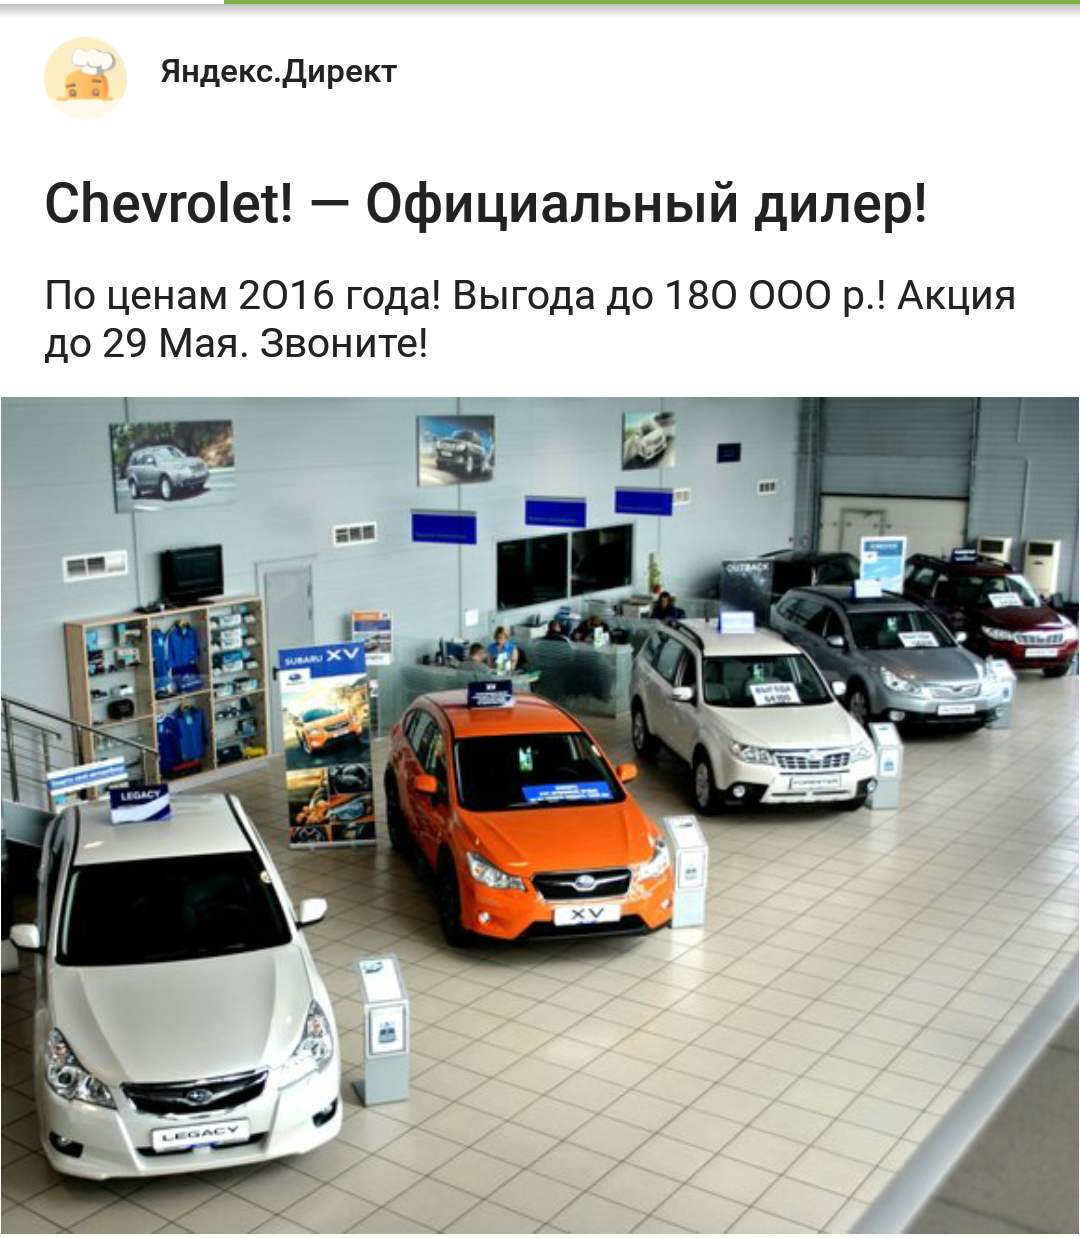 Advertising on a pick-up - My, Subaru, Chevrolet, Advertising, Embarrassment, Observation, Yandex Direct